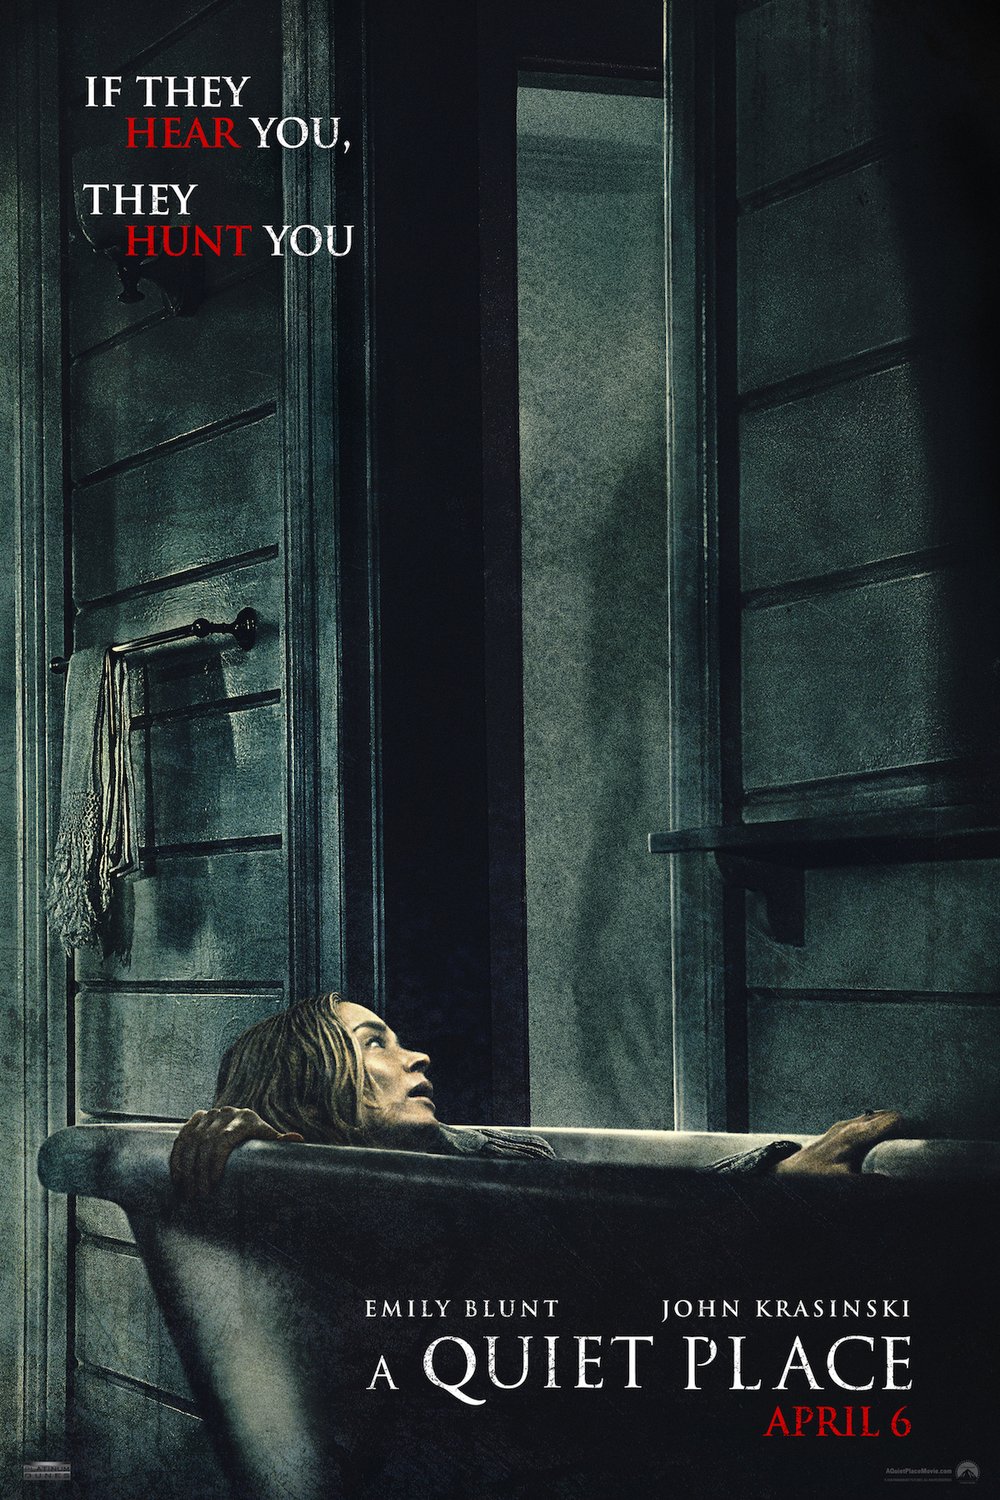 Poster of the movie A Quiet Place